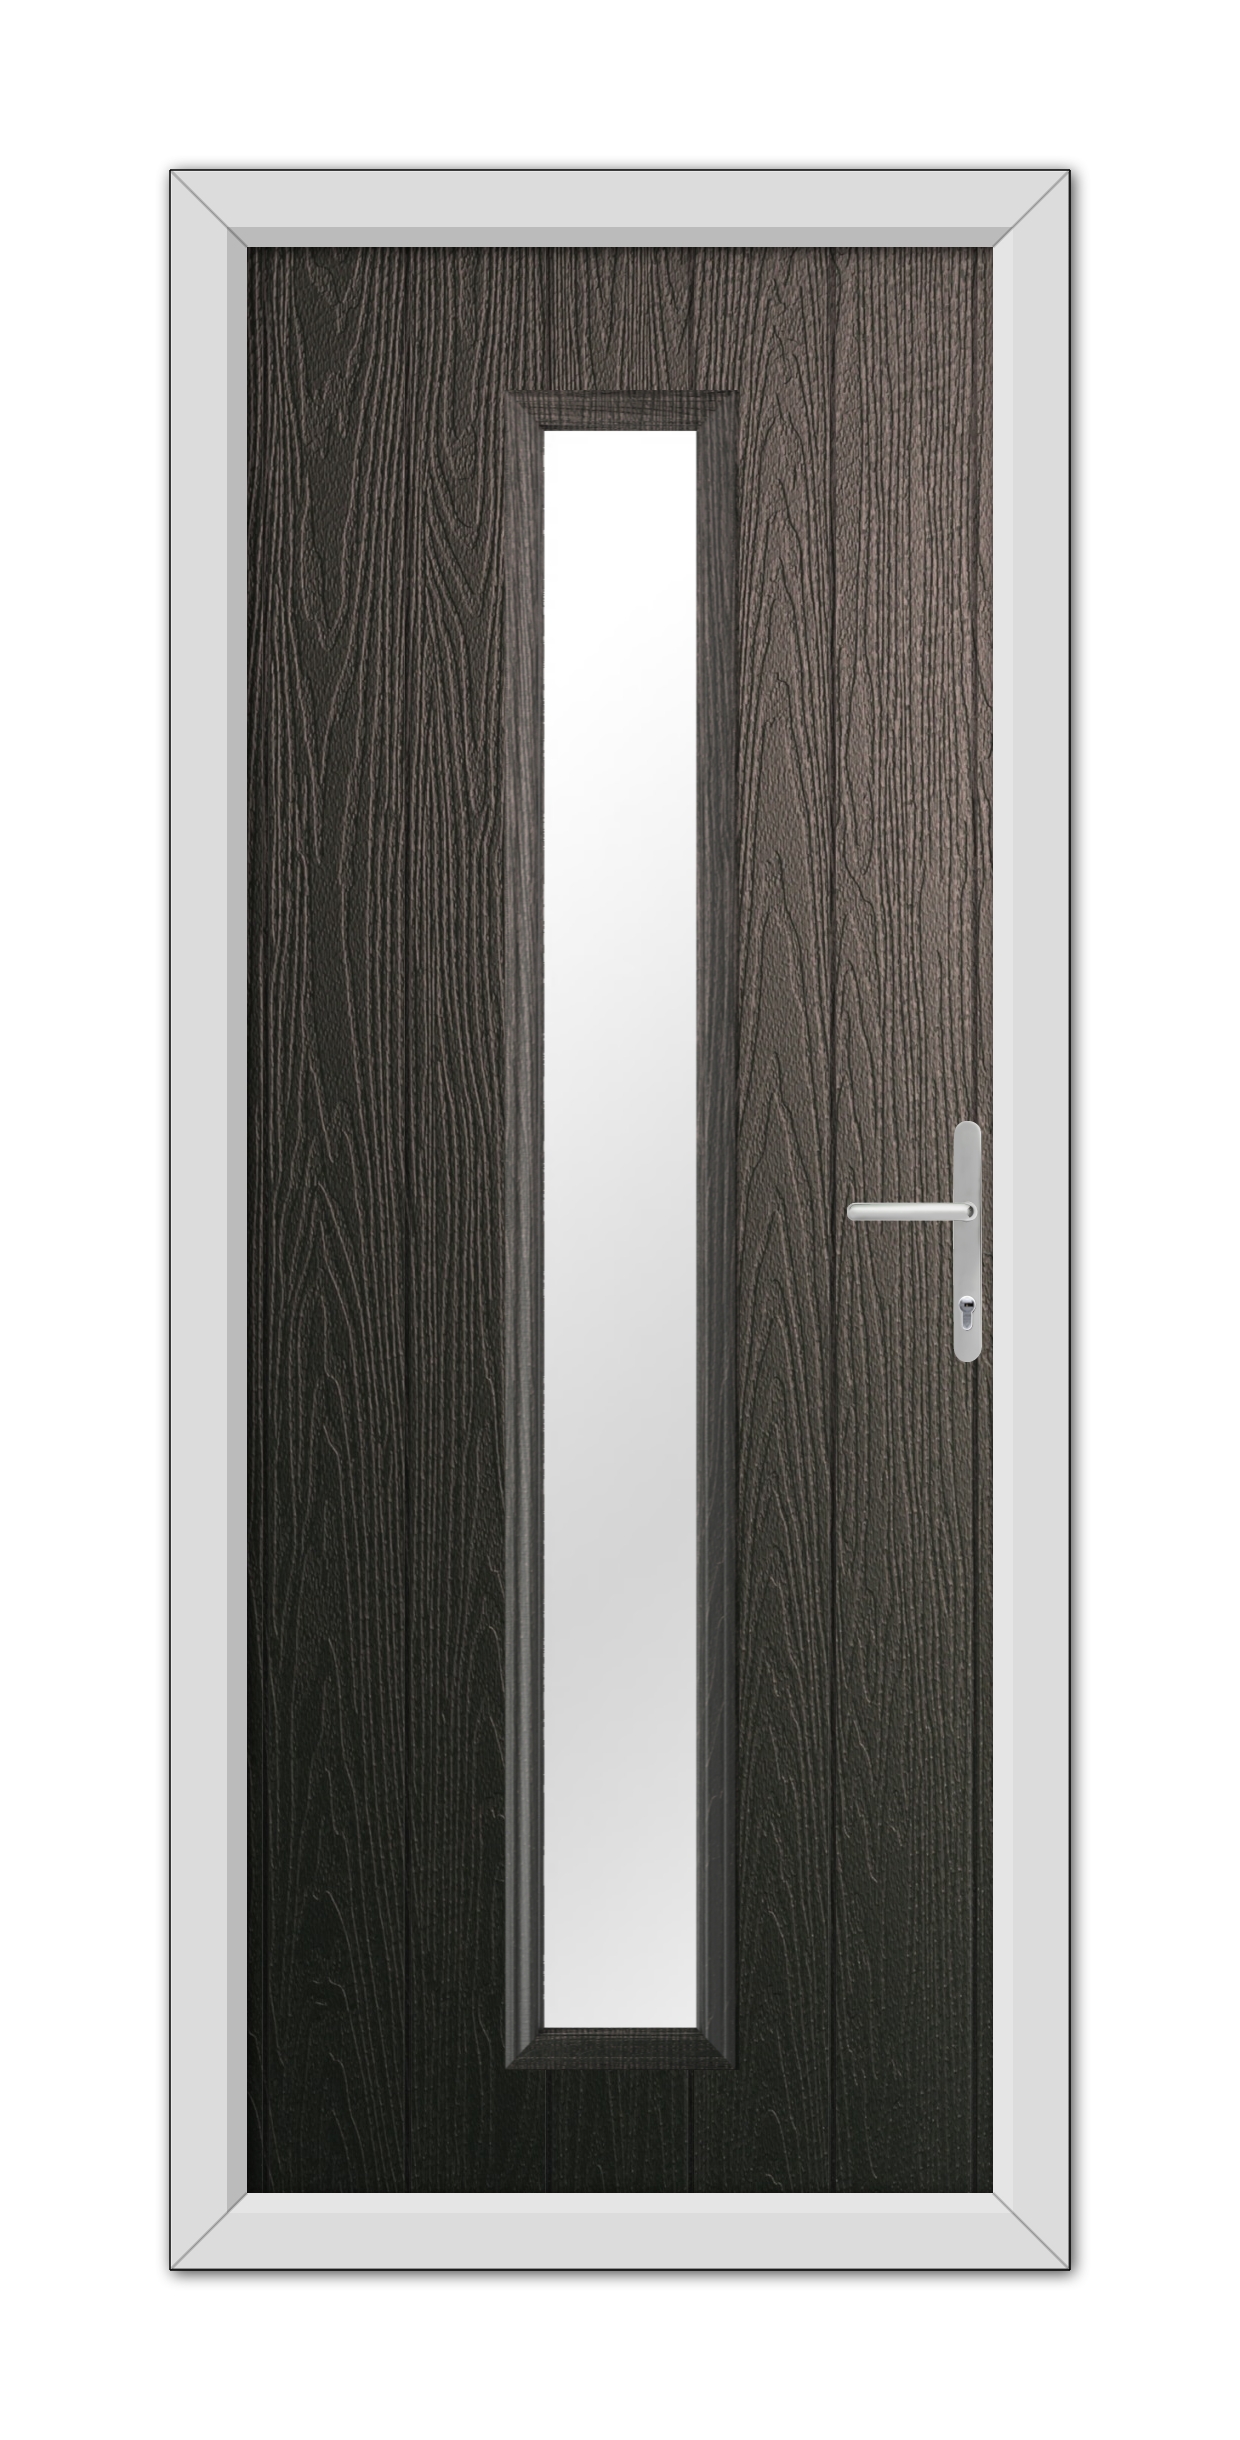 A Schwarzbraun Rutland Composite Door 48mm Timber Core with a vertical glass panel on the left side, featuring a metallic handle, framed in white.